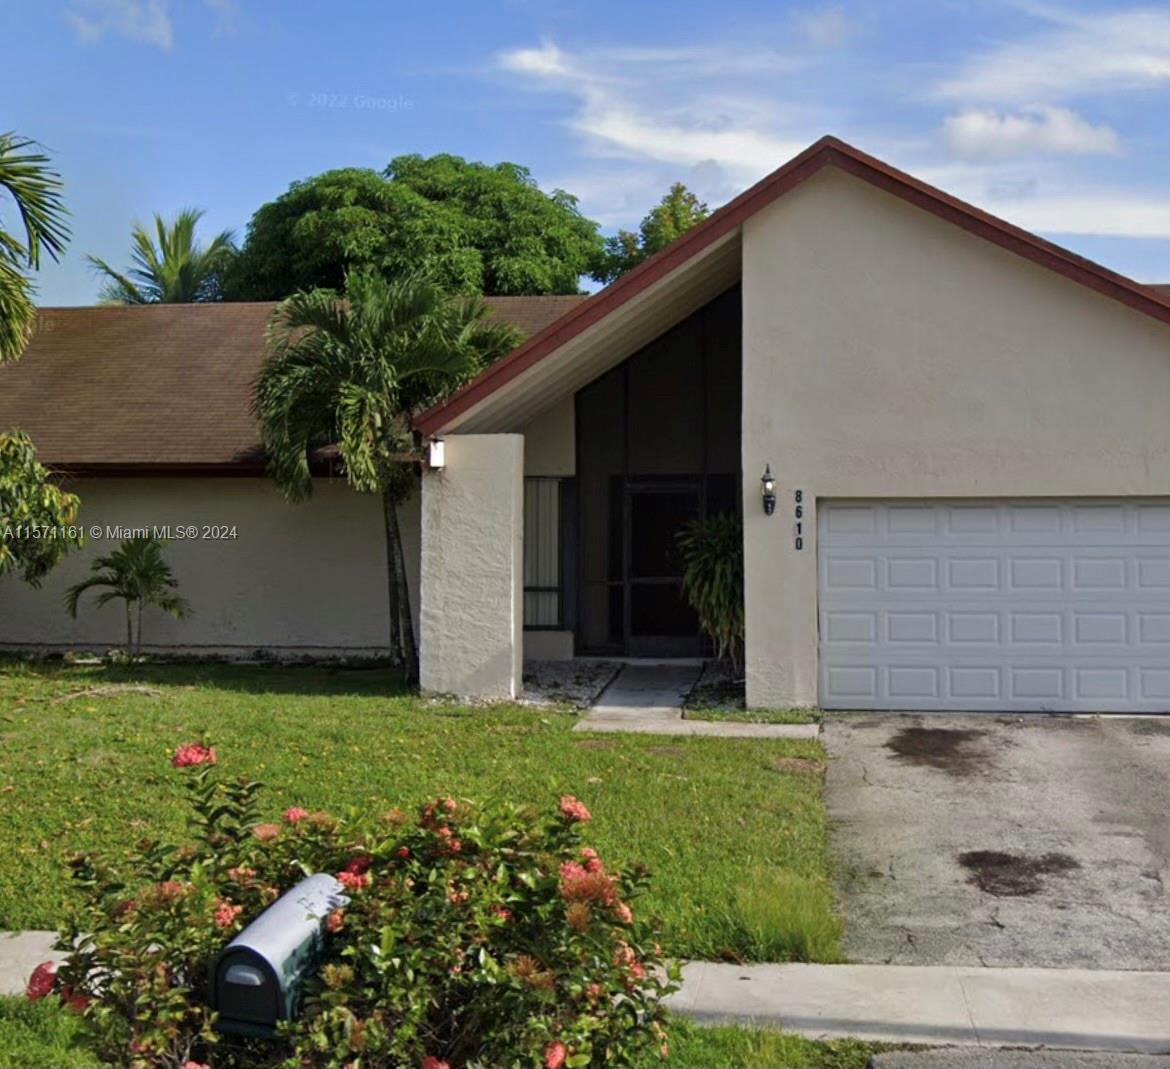 Photo of 8610 NW 52nd St in Lauderhill, FL